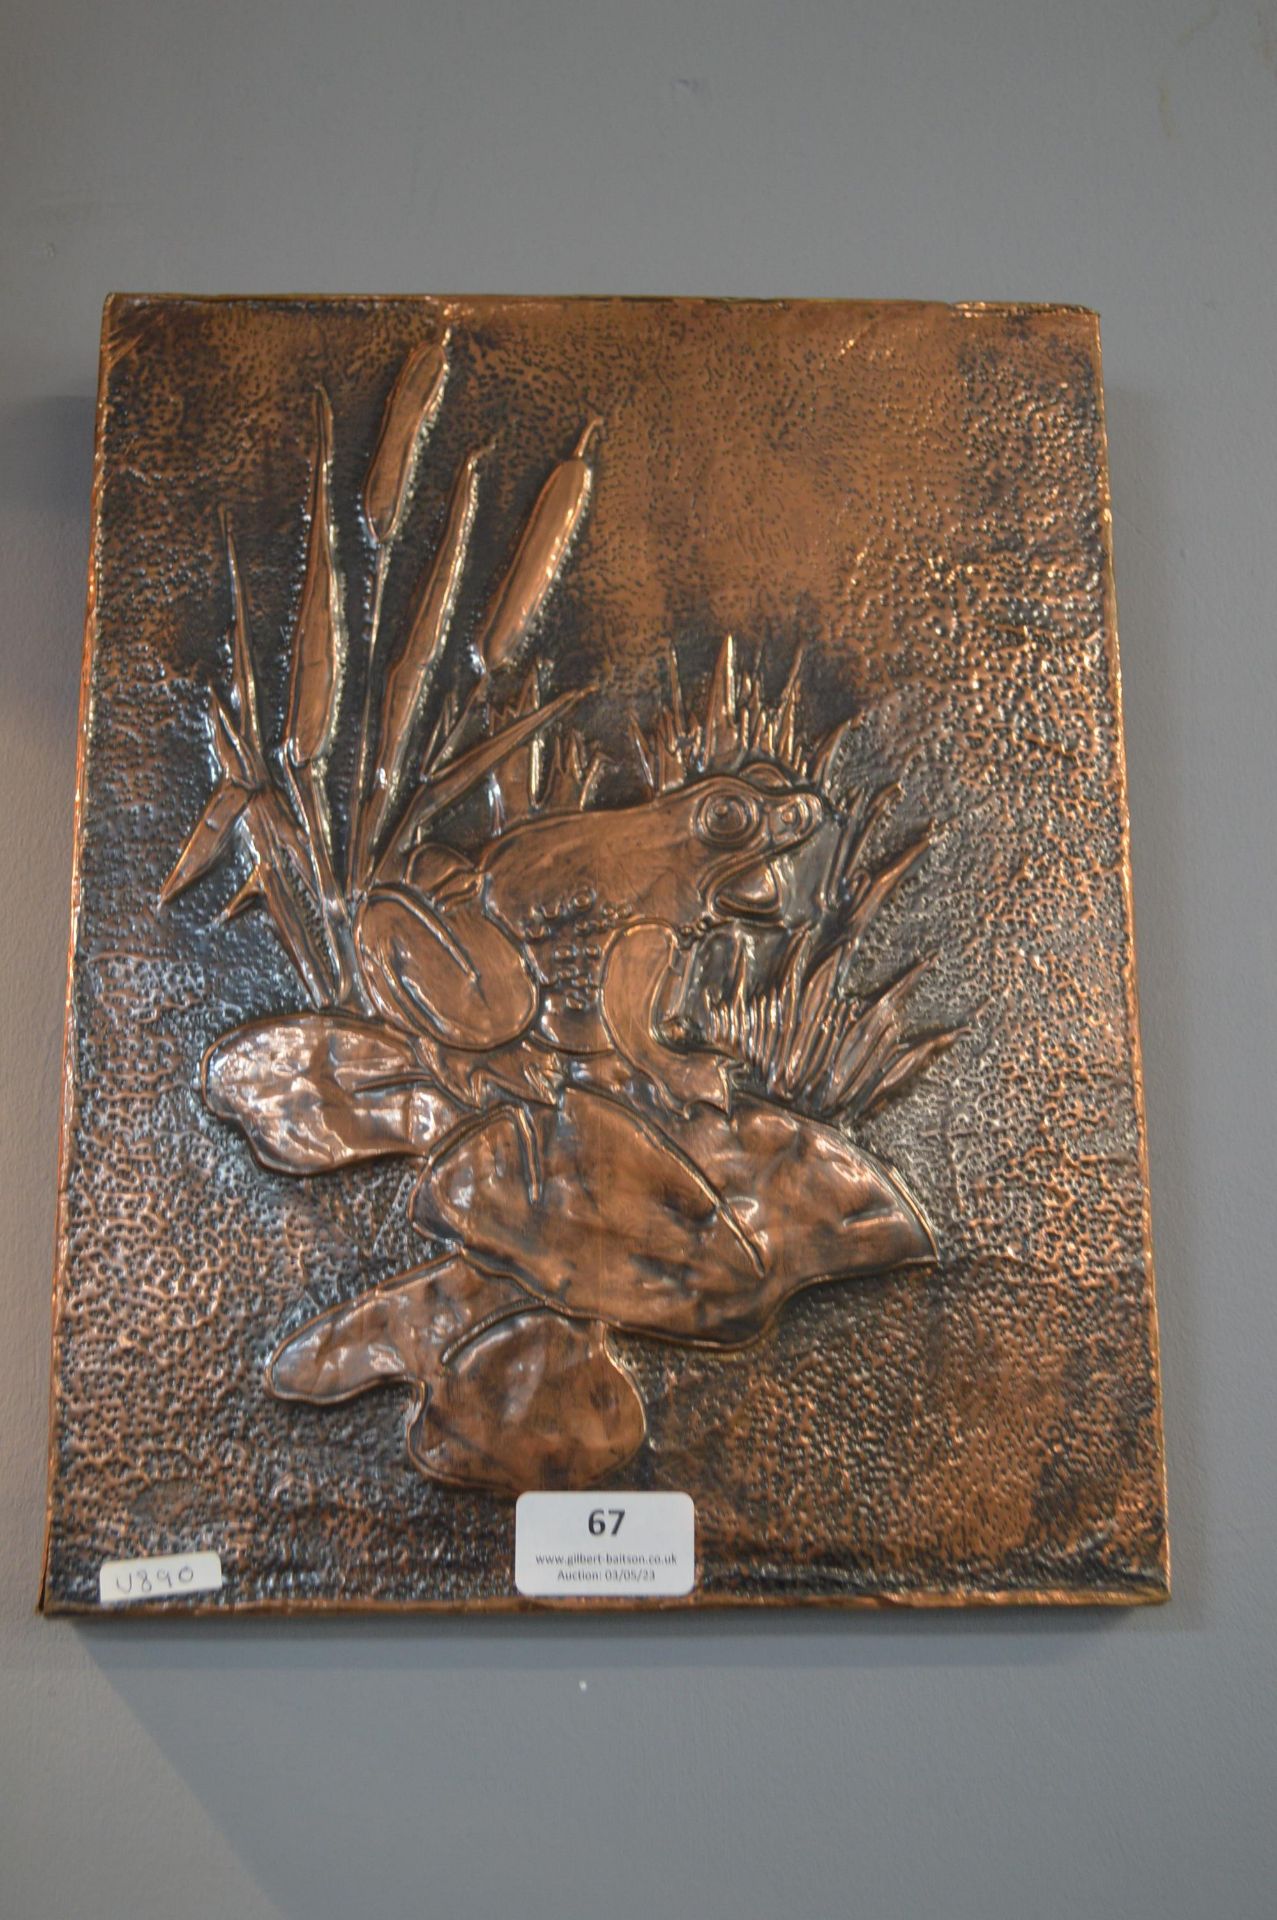 Hammered Copper Panel of a Frog on a Lily Pad